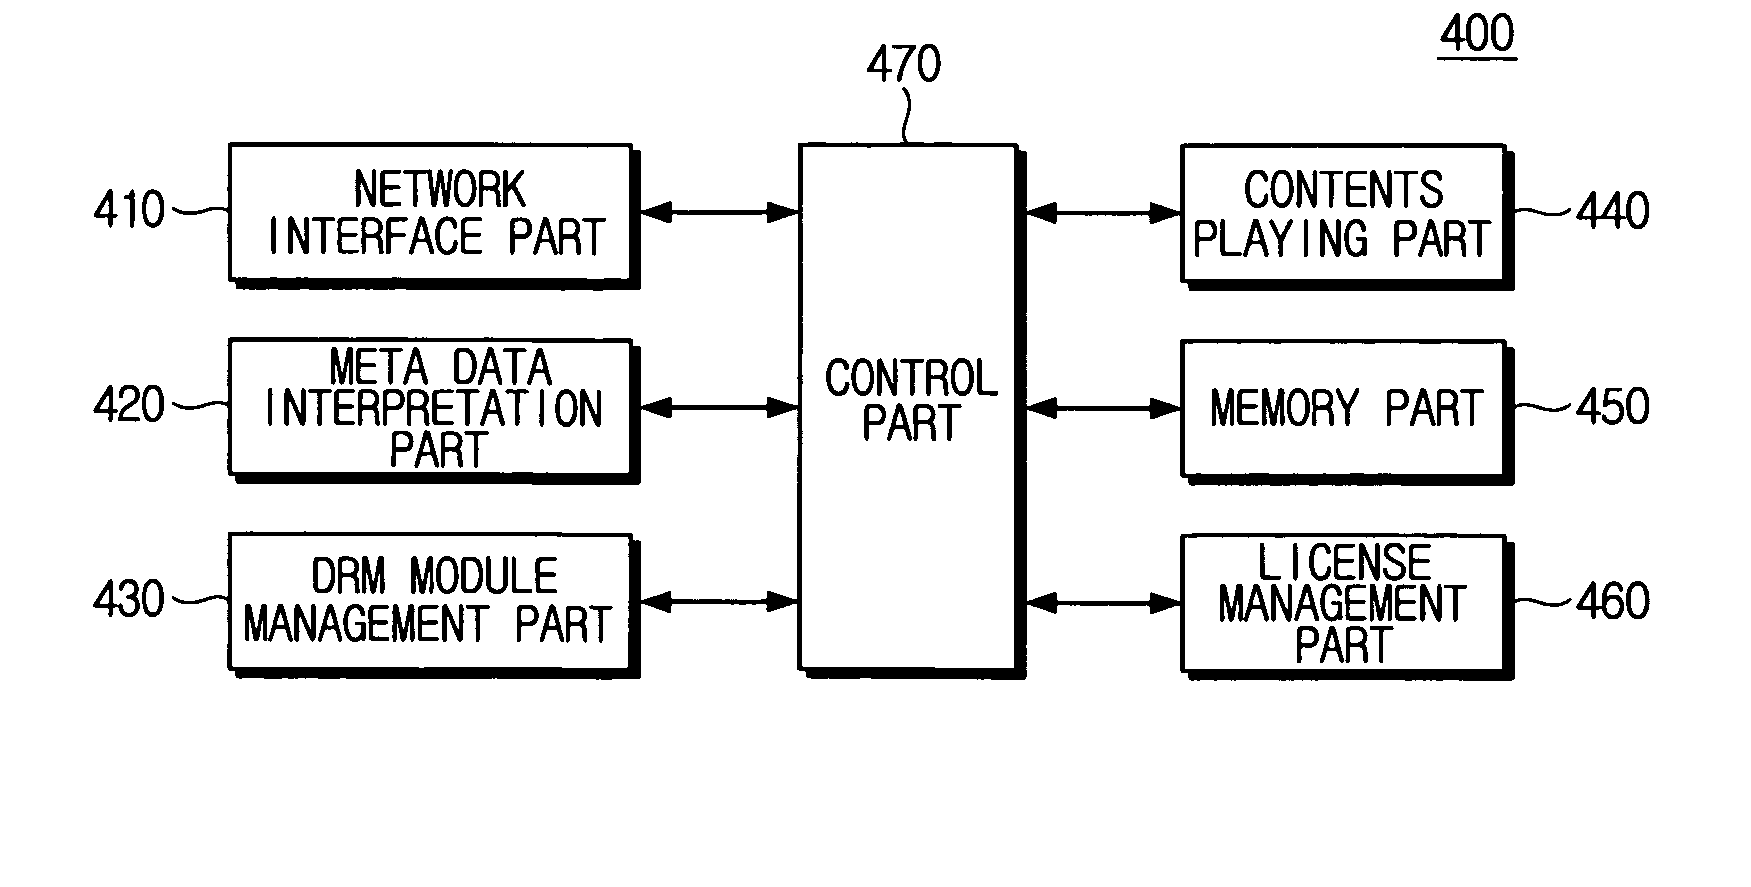 Contents player and playing method, mobile code providing device and providing method applied to DRM system